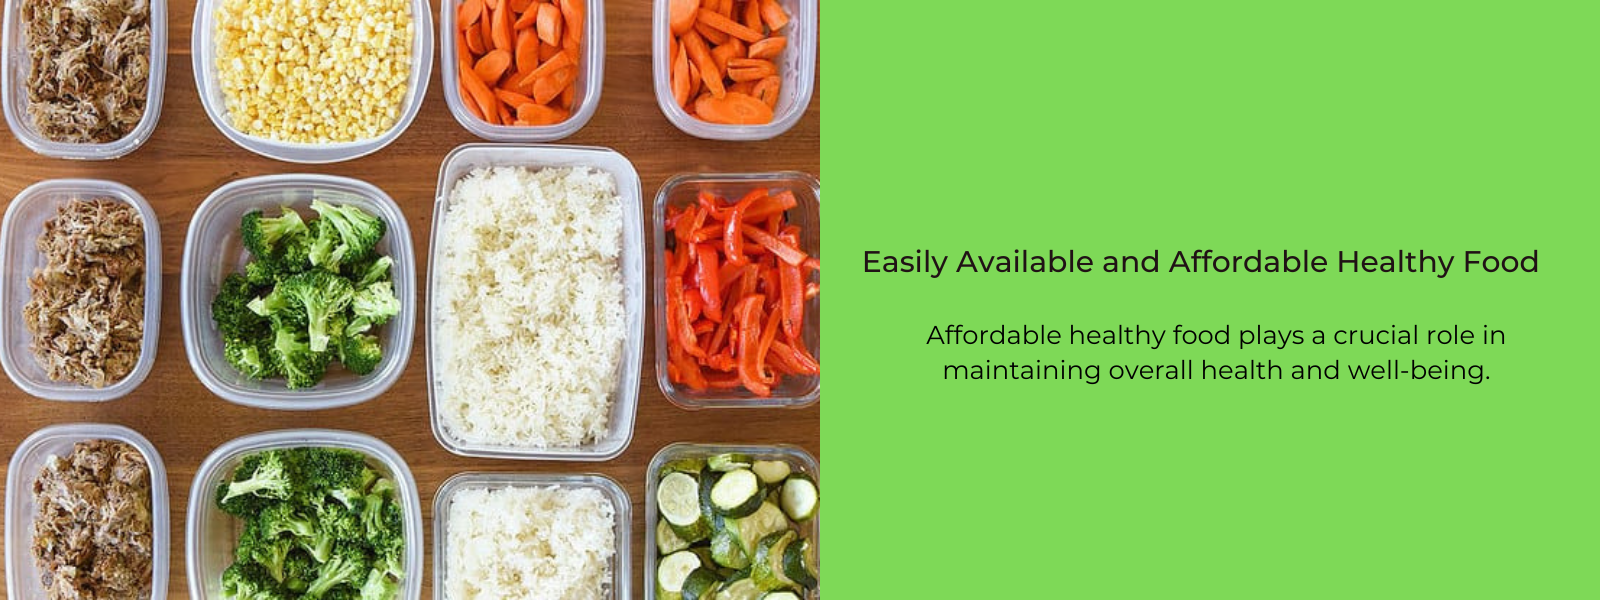 Easily Available and Affordable Healthy Food